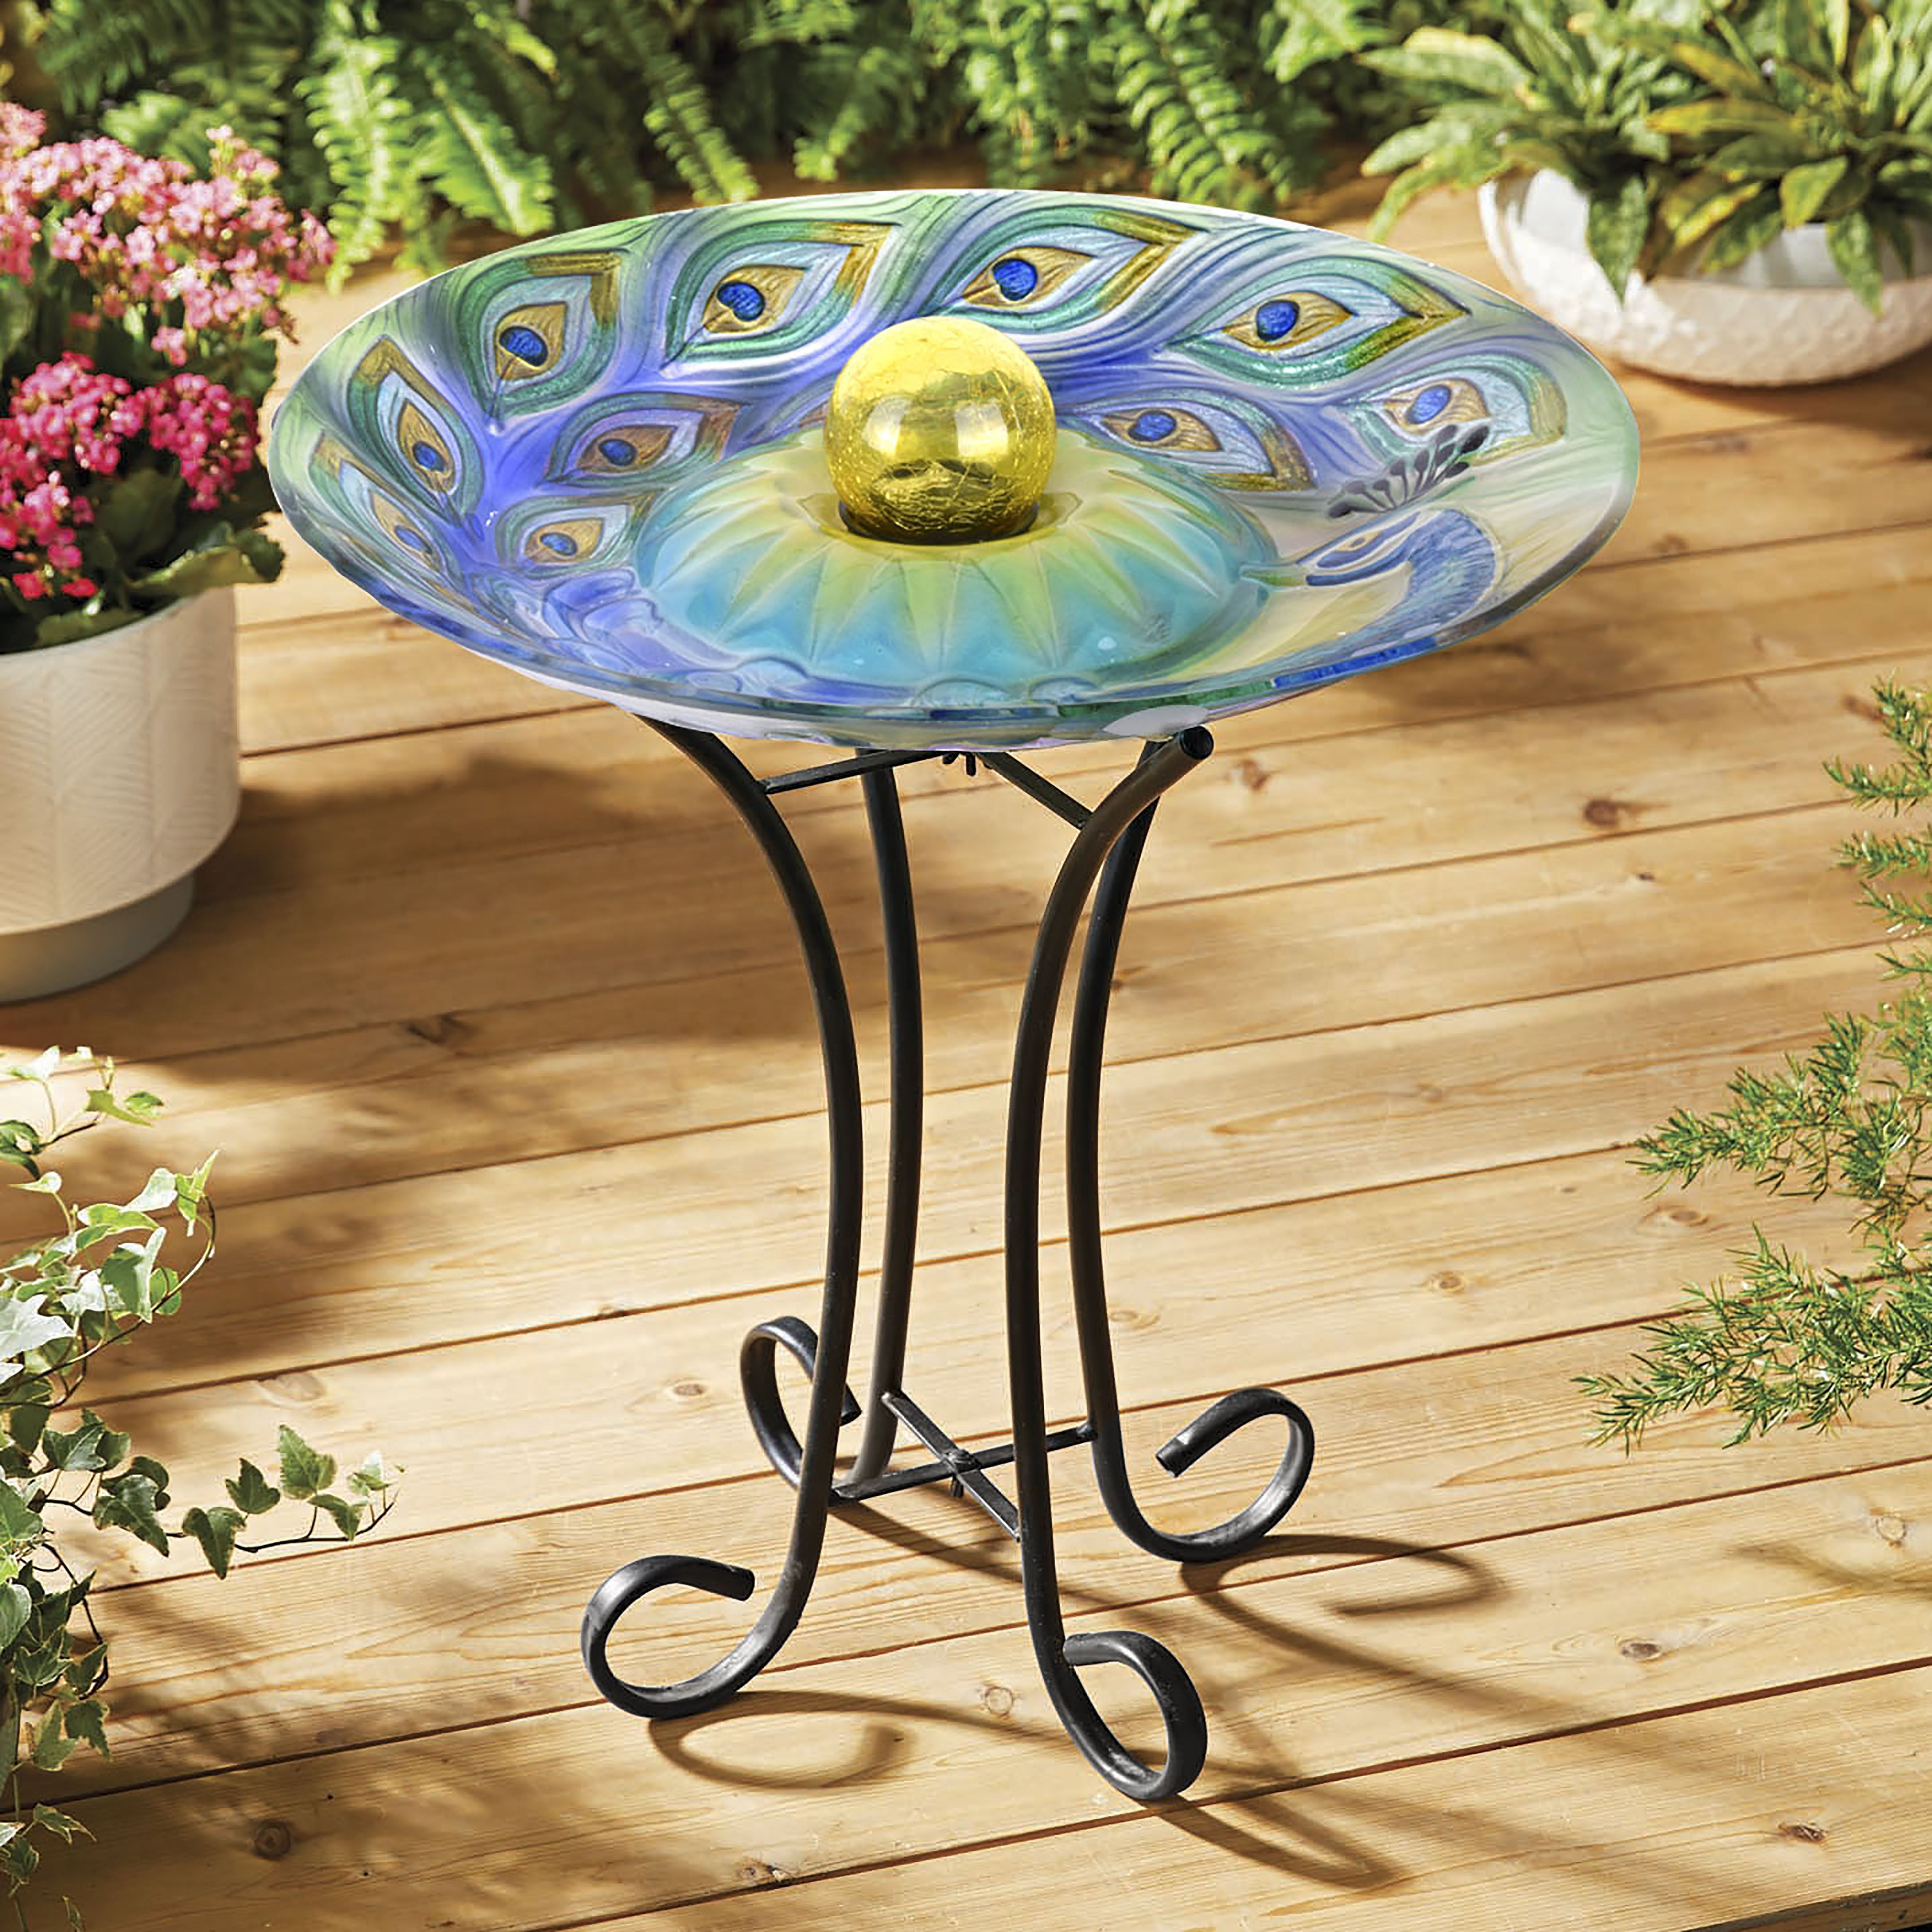 Panacea 82905 16 in Peacock Glass Bird Bath with Stand